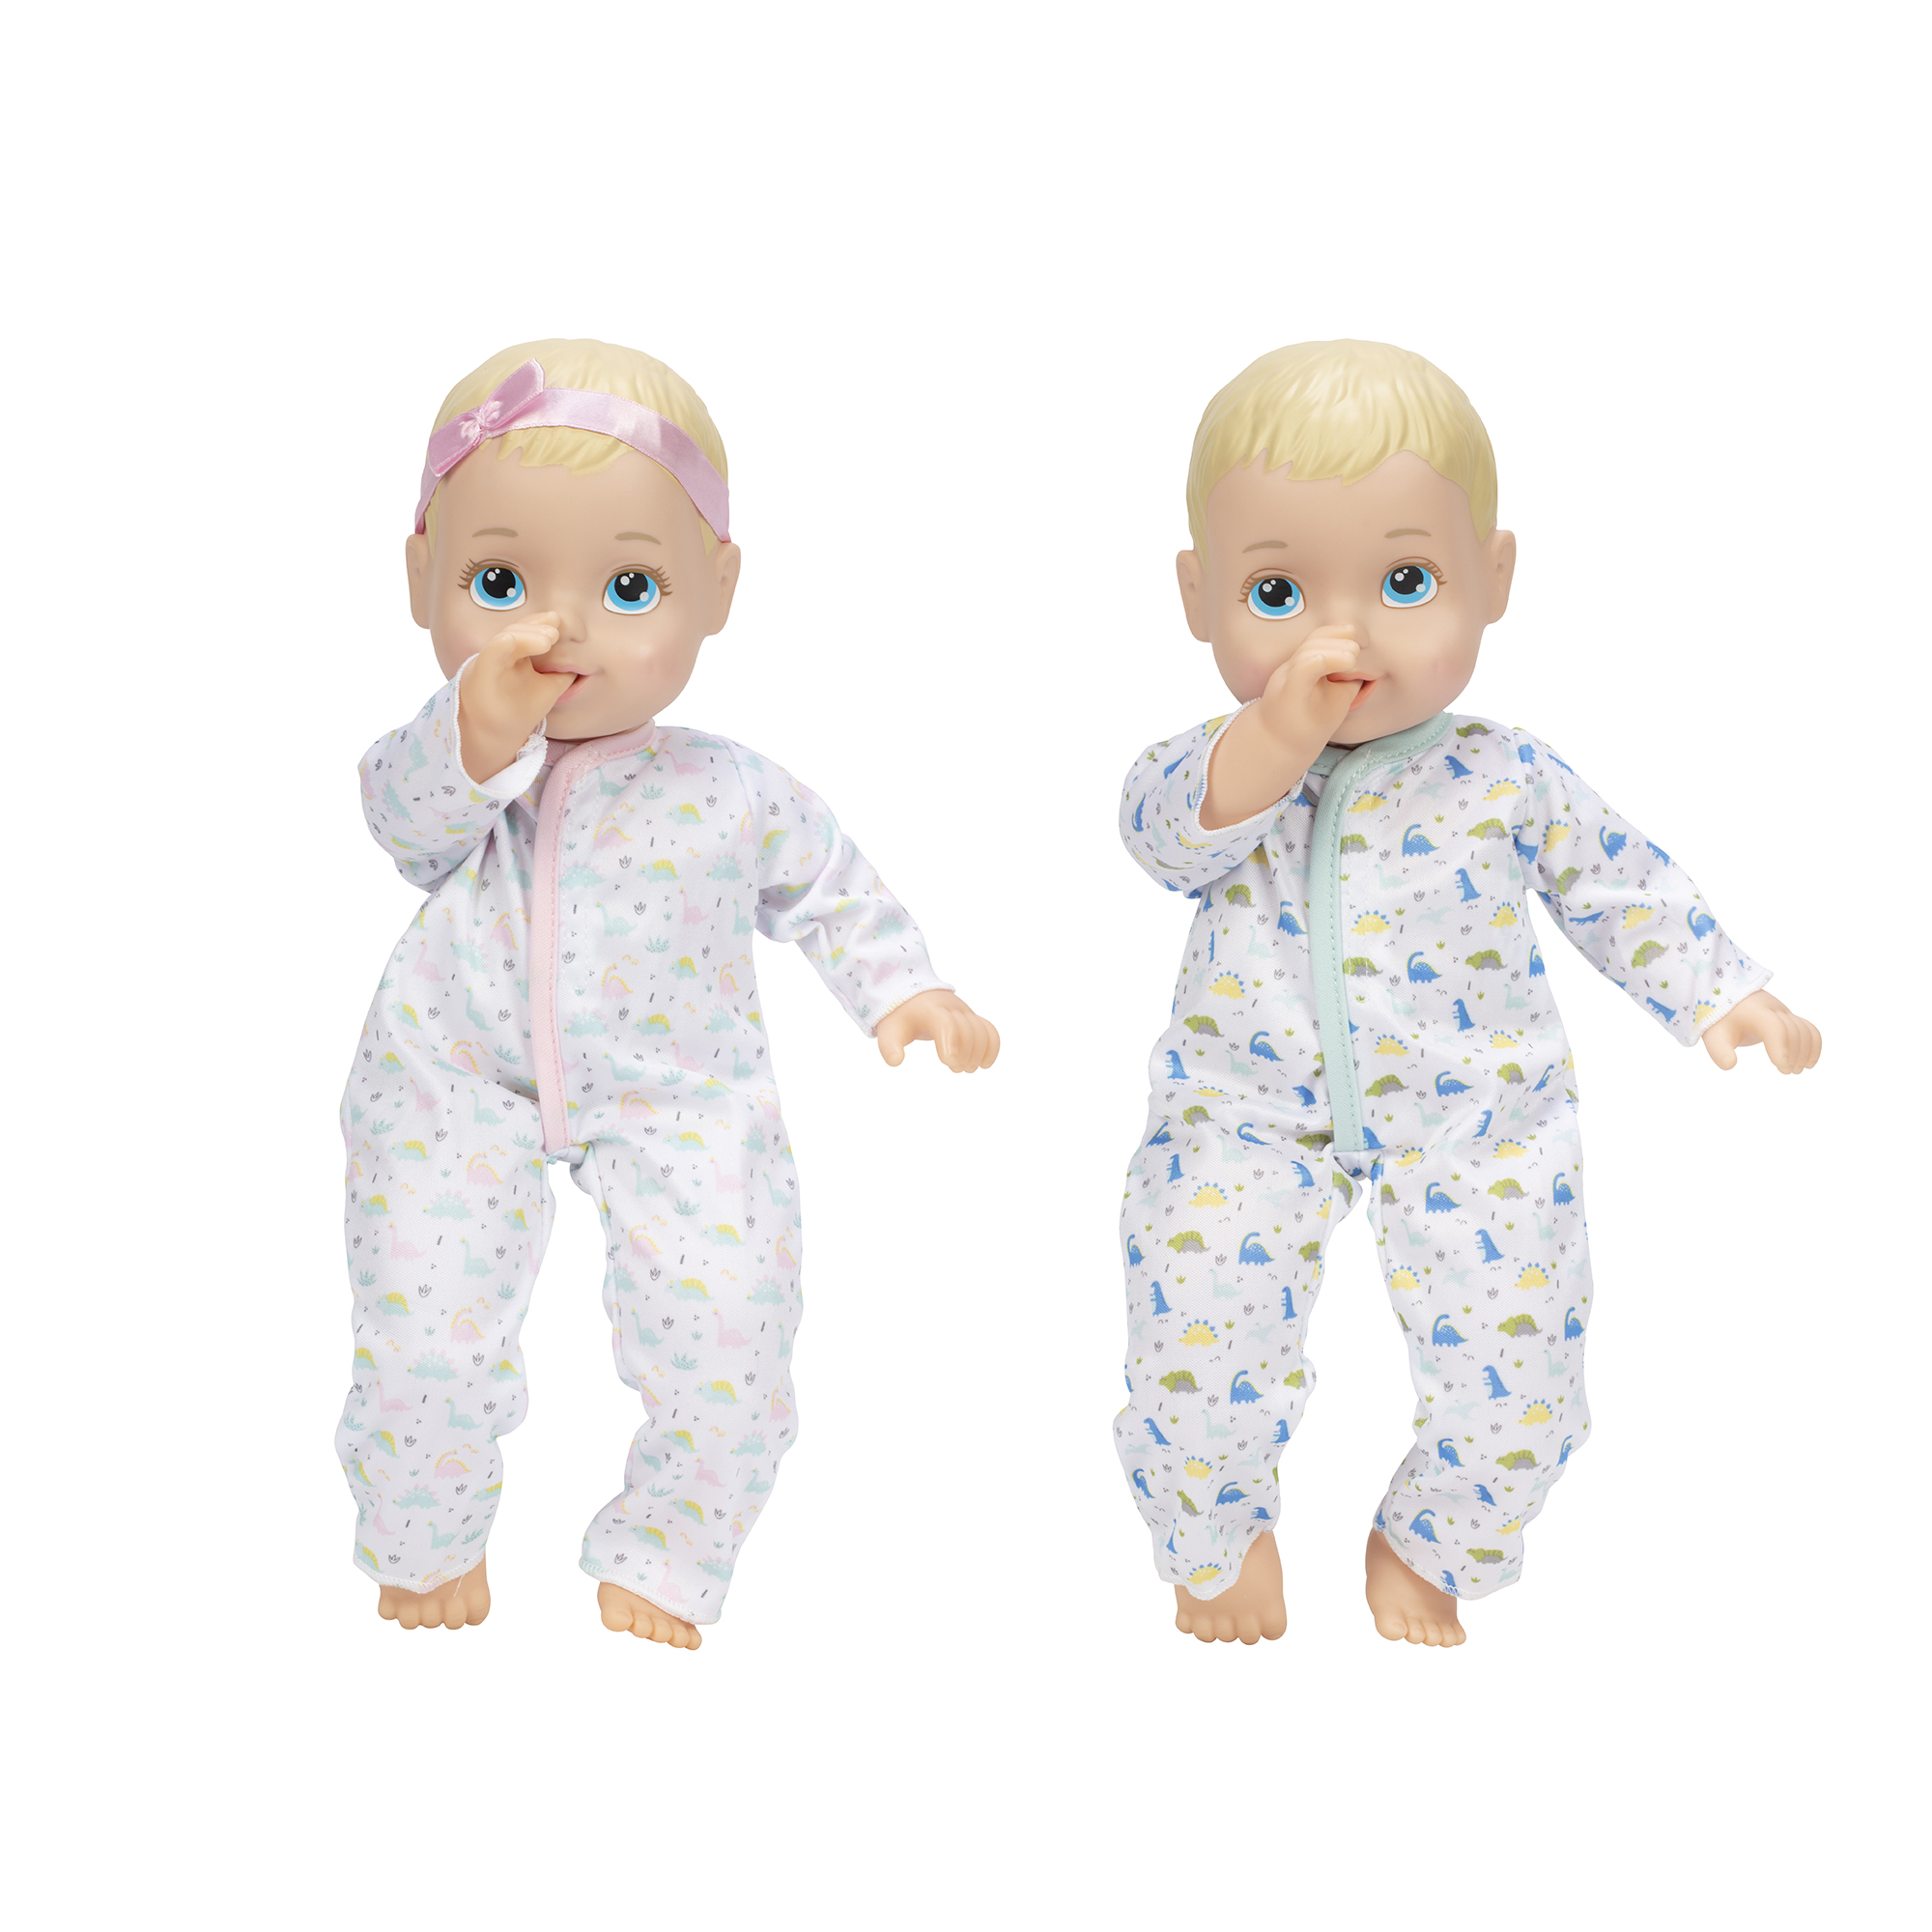 Your little one will adore doubling baby doll fun time with her very own set of Perfectly Cute 14" My Sweet Baby Doll TWINS! Dolls comes delightfully dressed in matching dinosaur printed onesies in two color ways. Each My Sweet Baby twin features a soft & cuddly body with easy-to-wipe-clean, durable hard plastic arms, legs, & head. Coordinating pacifiers, milk bottles, and pacifier clips also included! They're the identically sweet addition to every baby doll collection! Double the cuteness with matching twins! Each twin wears a matching set of dinosaur printed onesies Each twin comes with a matching milk bottle, pacifier, and pacifier clip Super soft & cuddly body Ideal for ages 2 & up Where To Buy